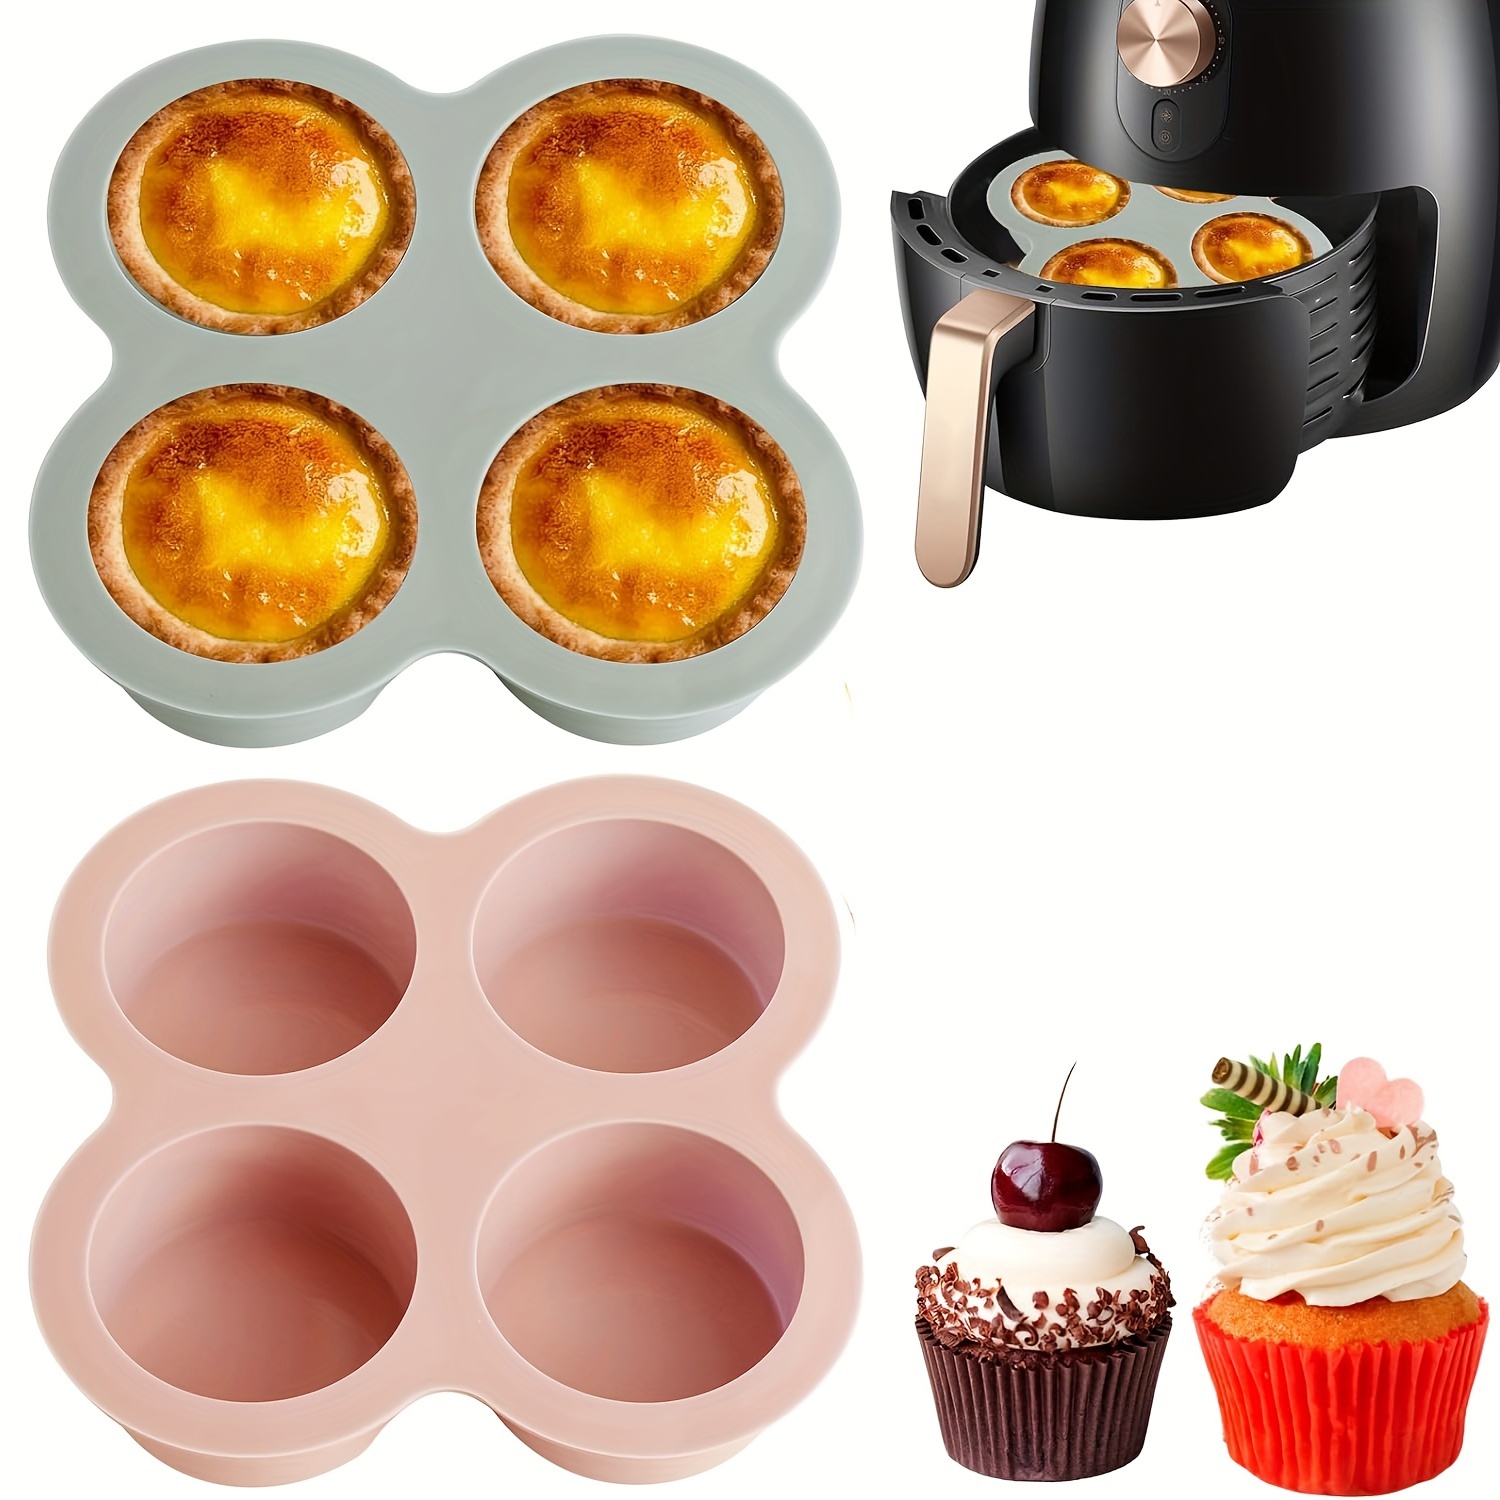 

1pc, Silicone Muffin Pan For Baking, 5.4''x5.4'', Non-stick Food-grade Air Fryer Liner, Air Fryer Accessories